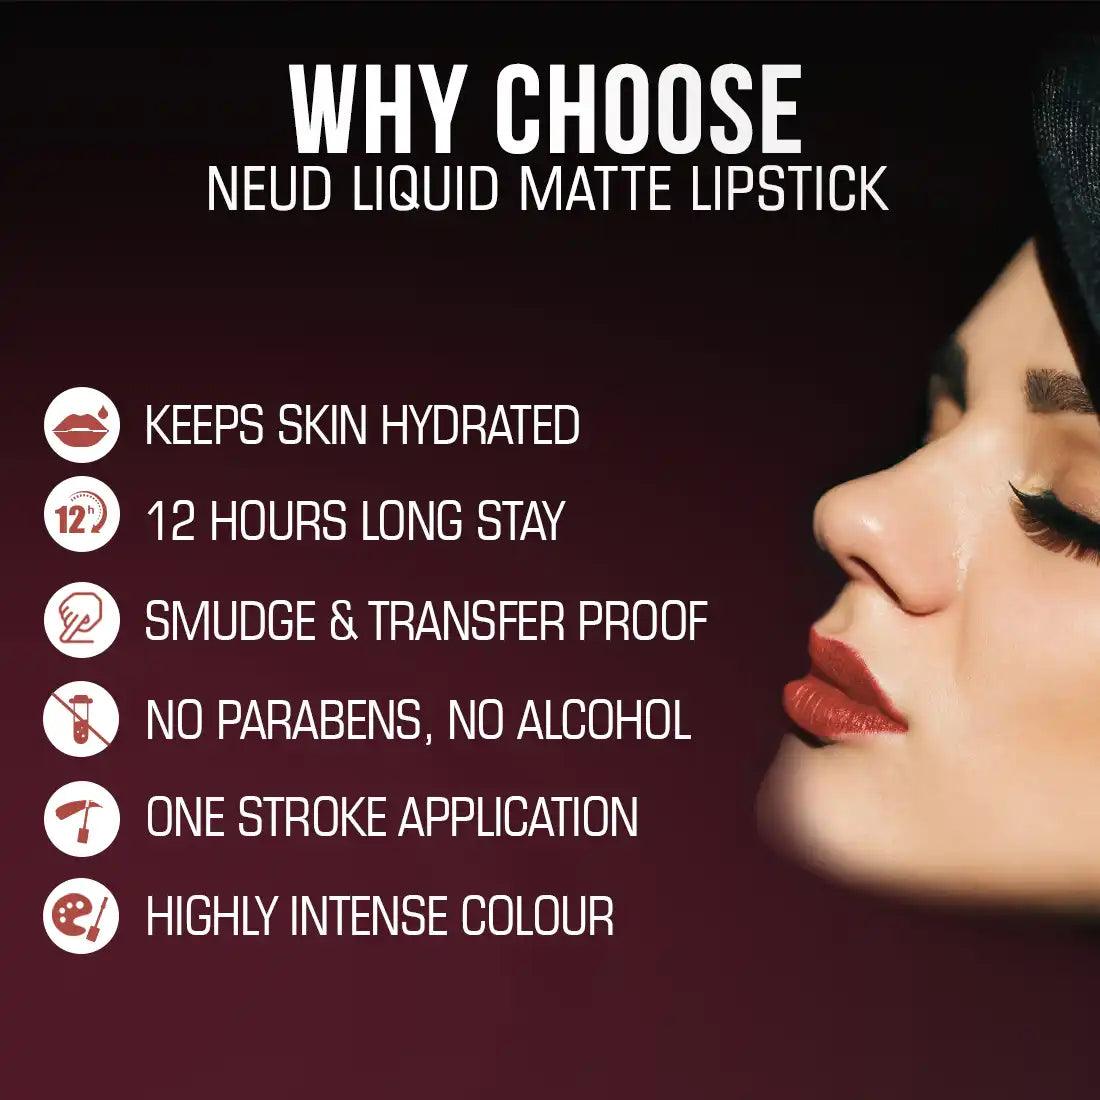 NEUD Matte Liquid Lipstick Jolly Coral Gives Hydration and Smudge-Proof 12-hour Stay With No Parabens or Alcohol - everteen-neud.com